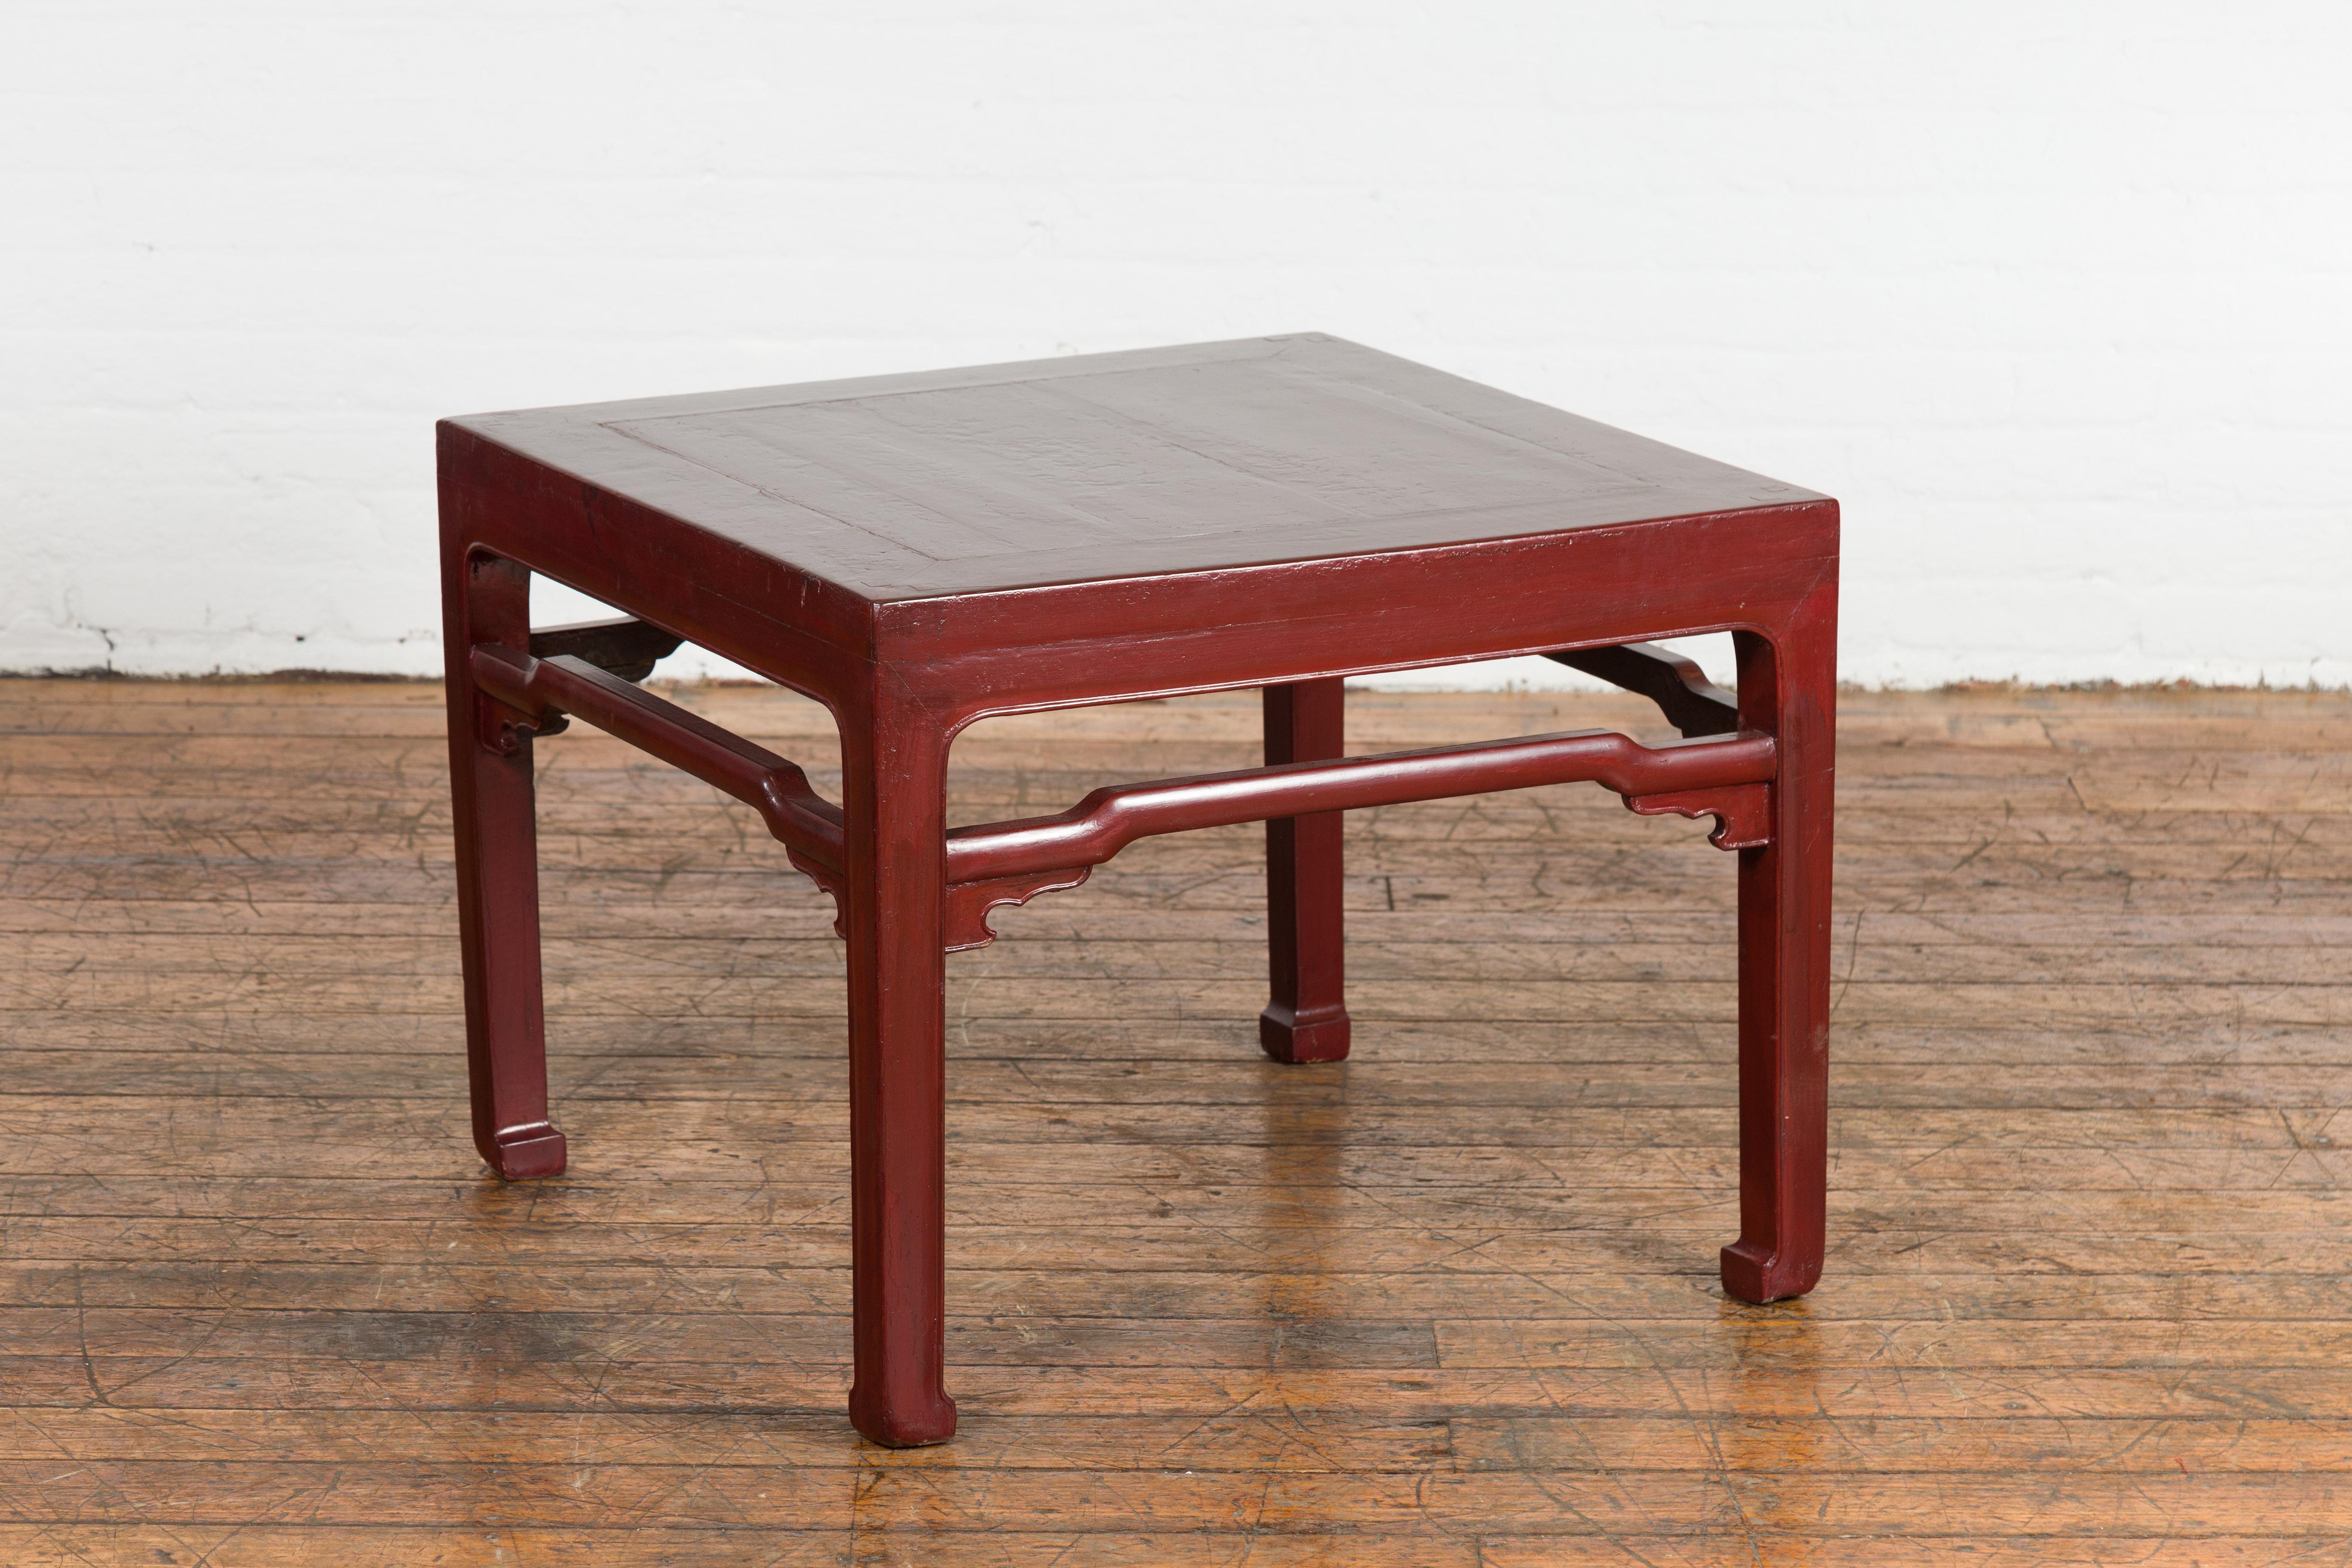 Chinese Late Qing Dynasty Period Red Lacquered Low Table with Horsehoof Feet In Good Condition For Sale In Yonkers, NY